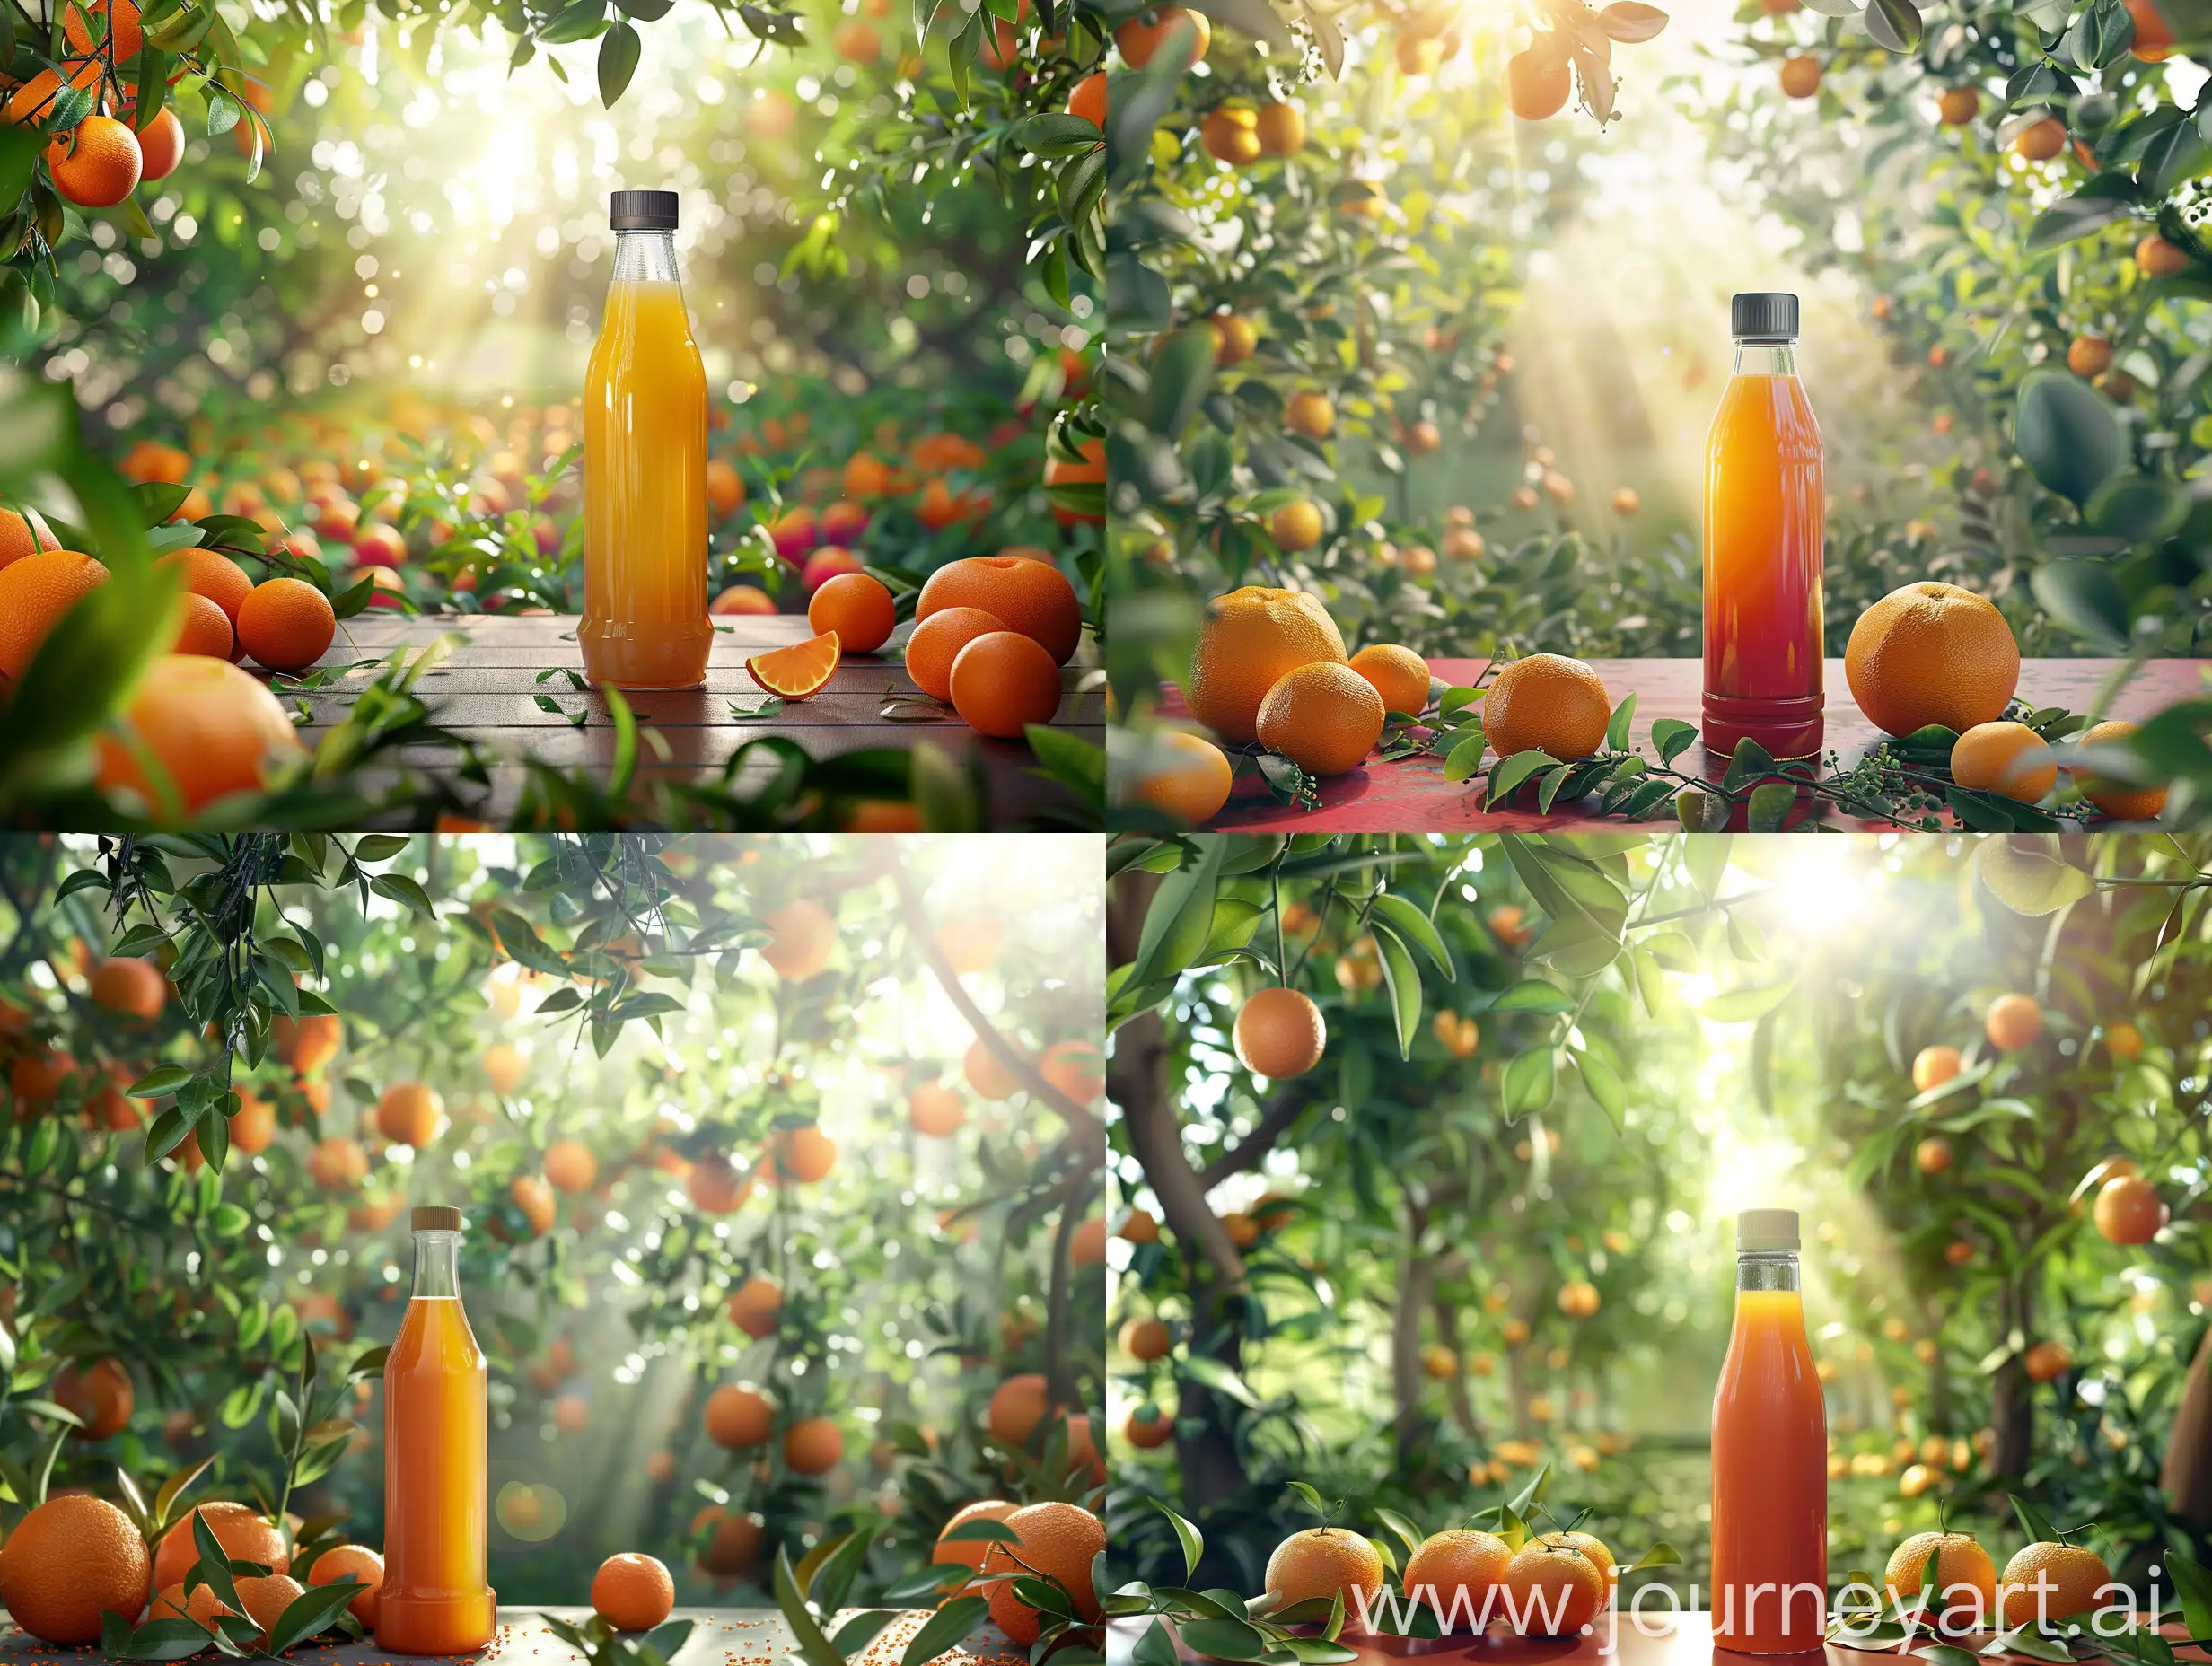 Create a hyper-realistic narrow bottle of orange juice on a table in an orange grove with greenery, oranges and a little red, and light shining through the branches of the trees.  There are some oranges on the table with a bright gradient that looks like a photo studio, its front view